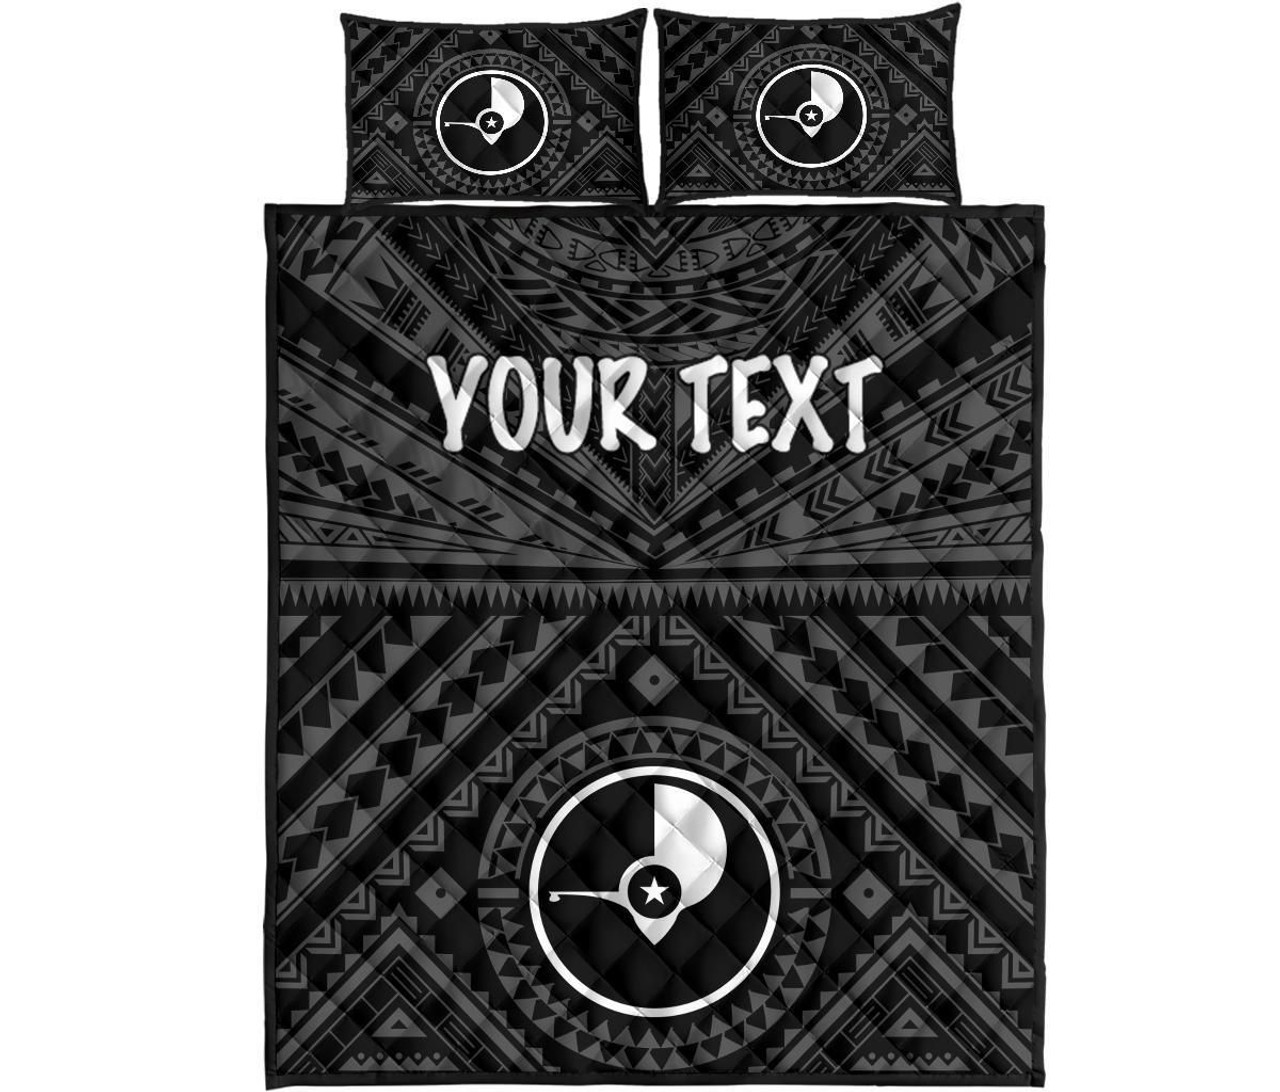 Yap Personalised Quilt Bed Set - Yap Seal With Polynesian Tattoo Style 5